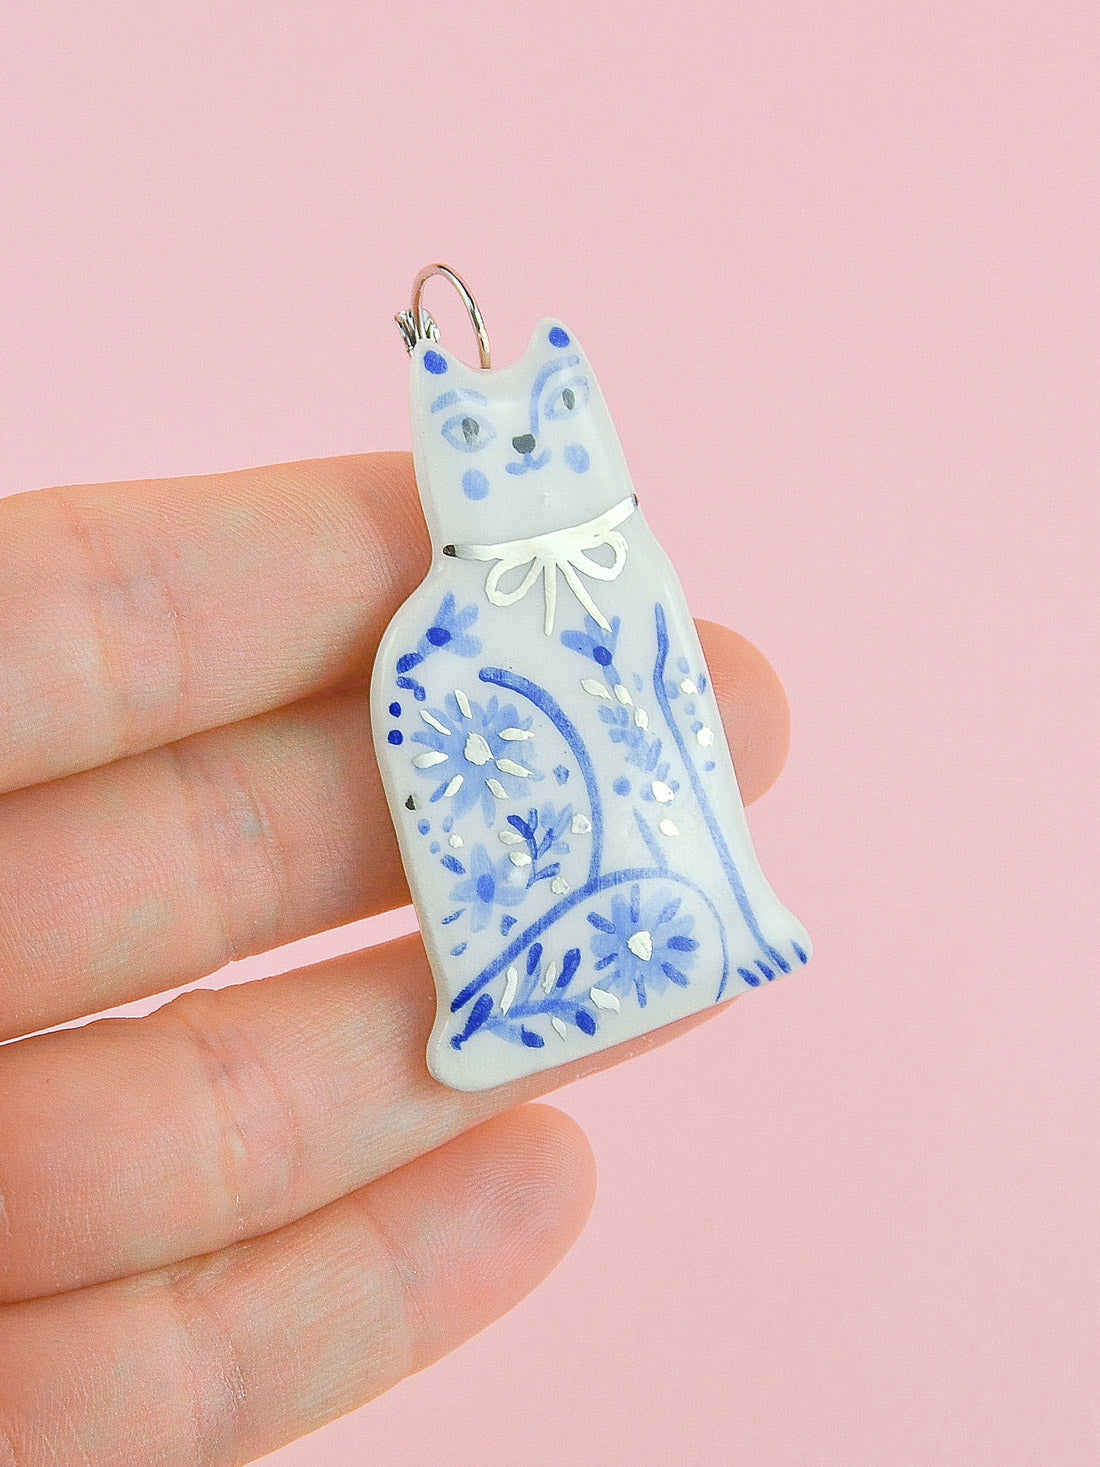 Ceramic Handpainted Cat Earrings with Flowers   silver2 94329d83 85ae 4f50 b4e2 7a9d2894fde8